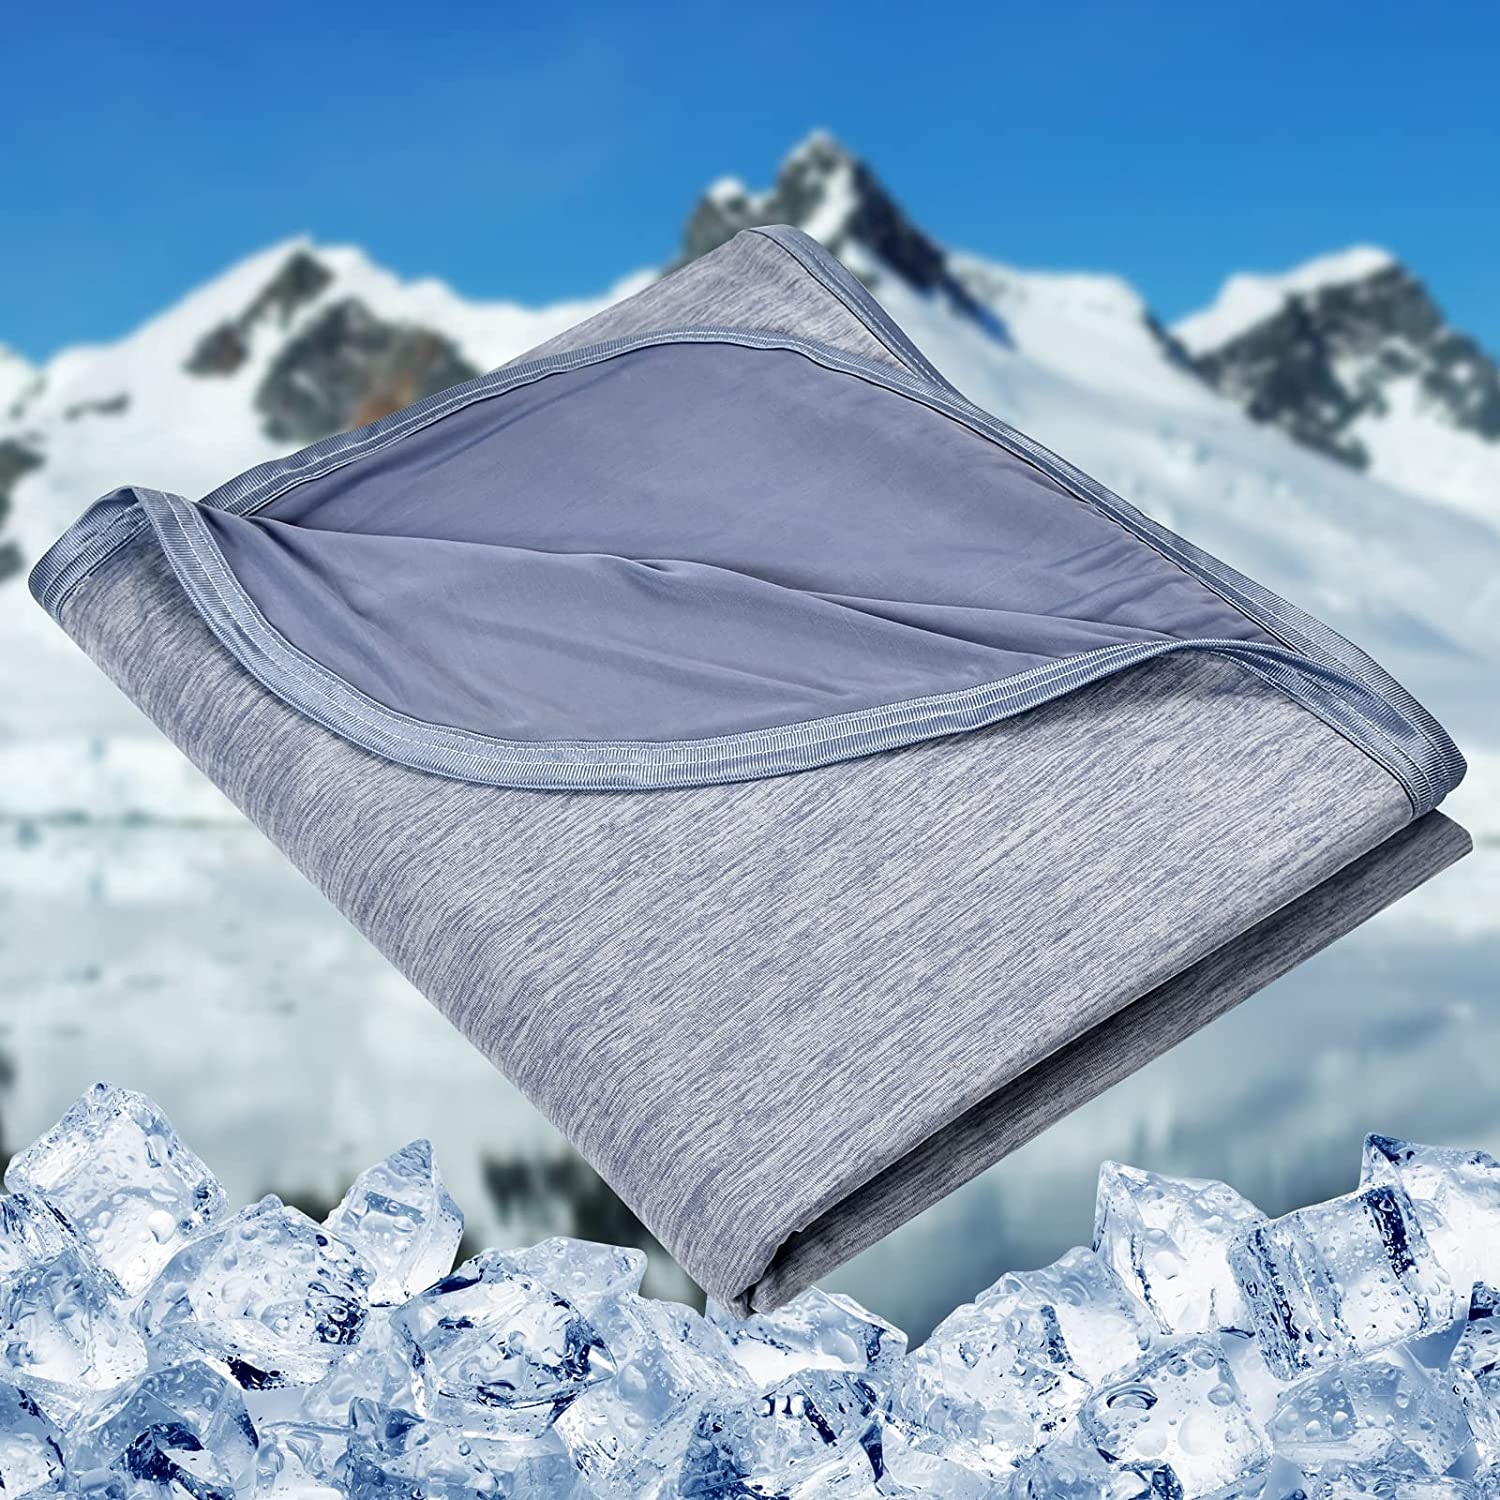 HOMFINE Cooling Blankets for Hot Sleepers